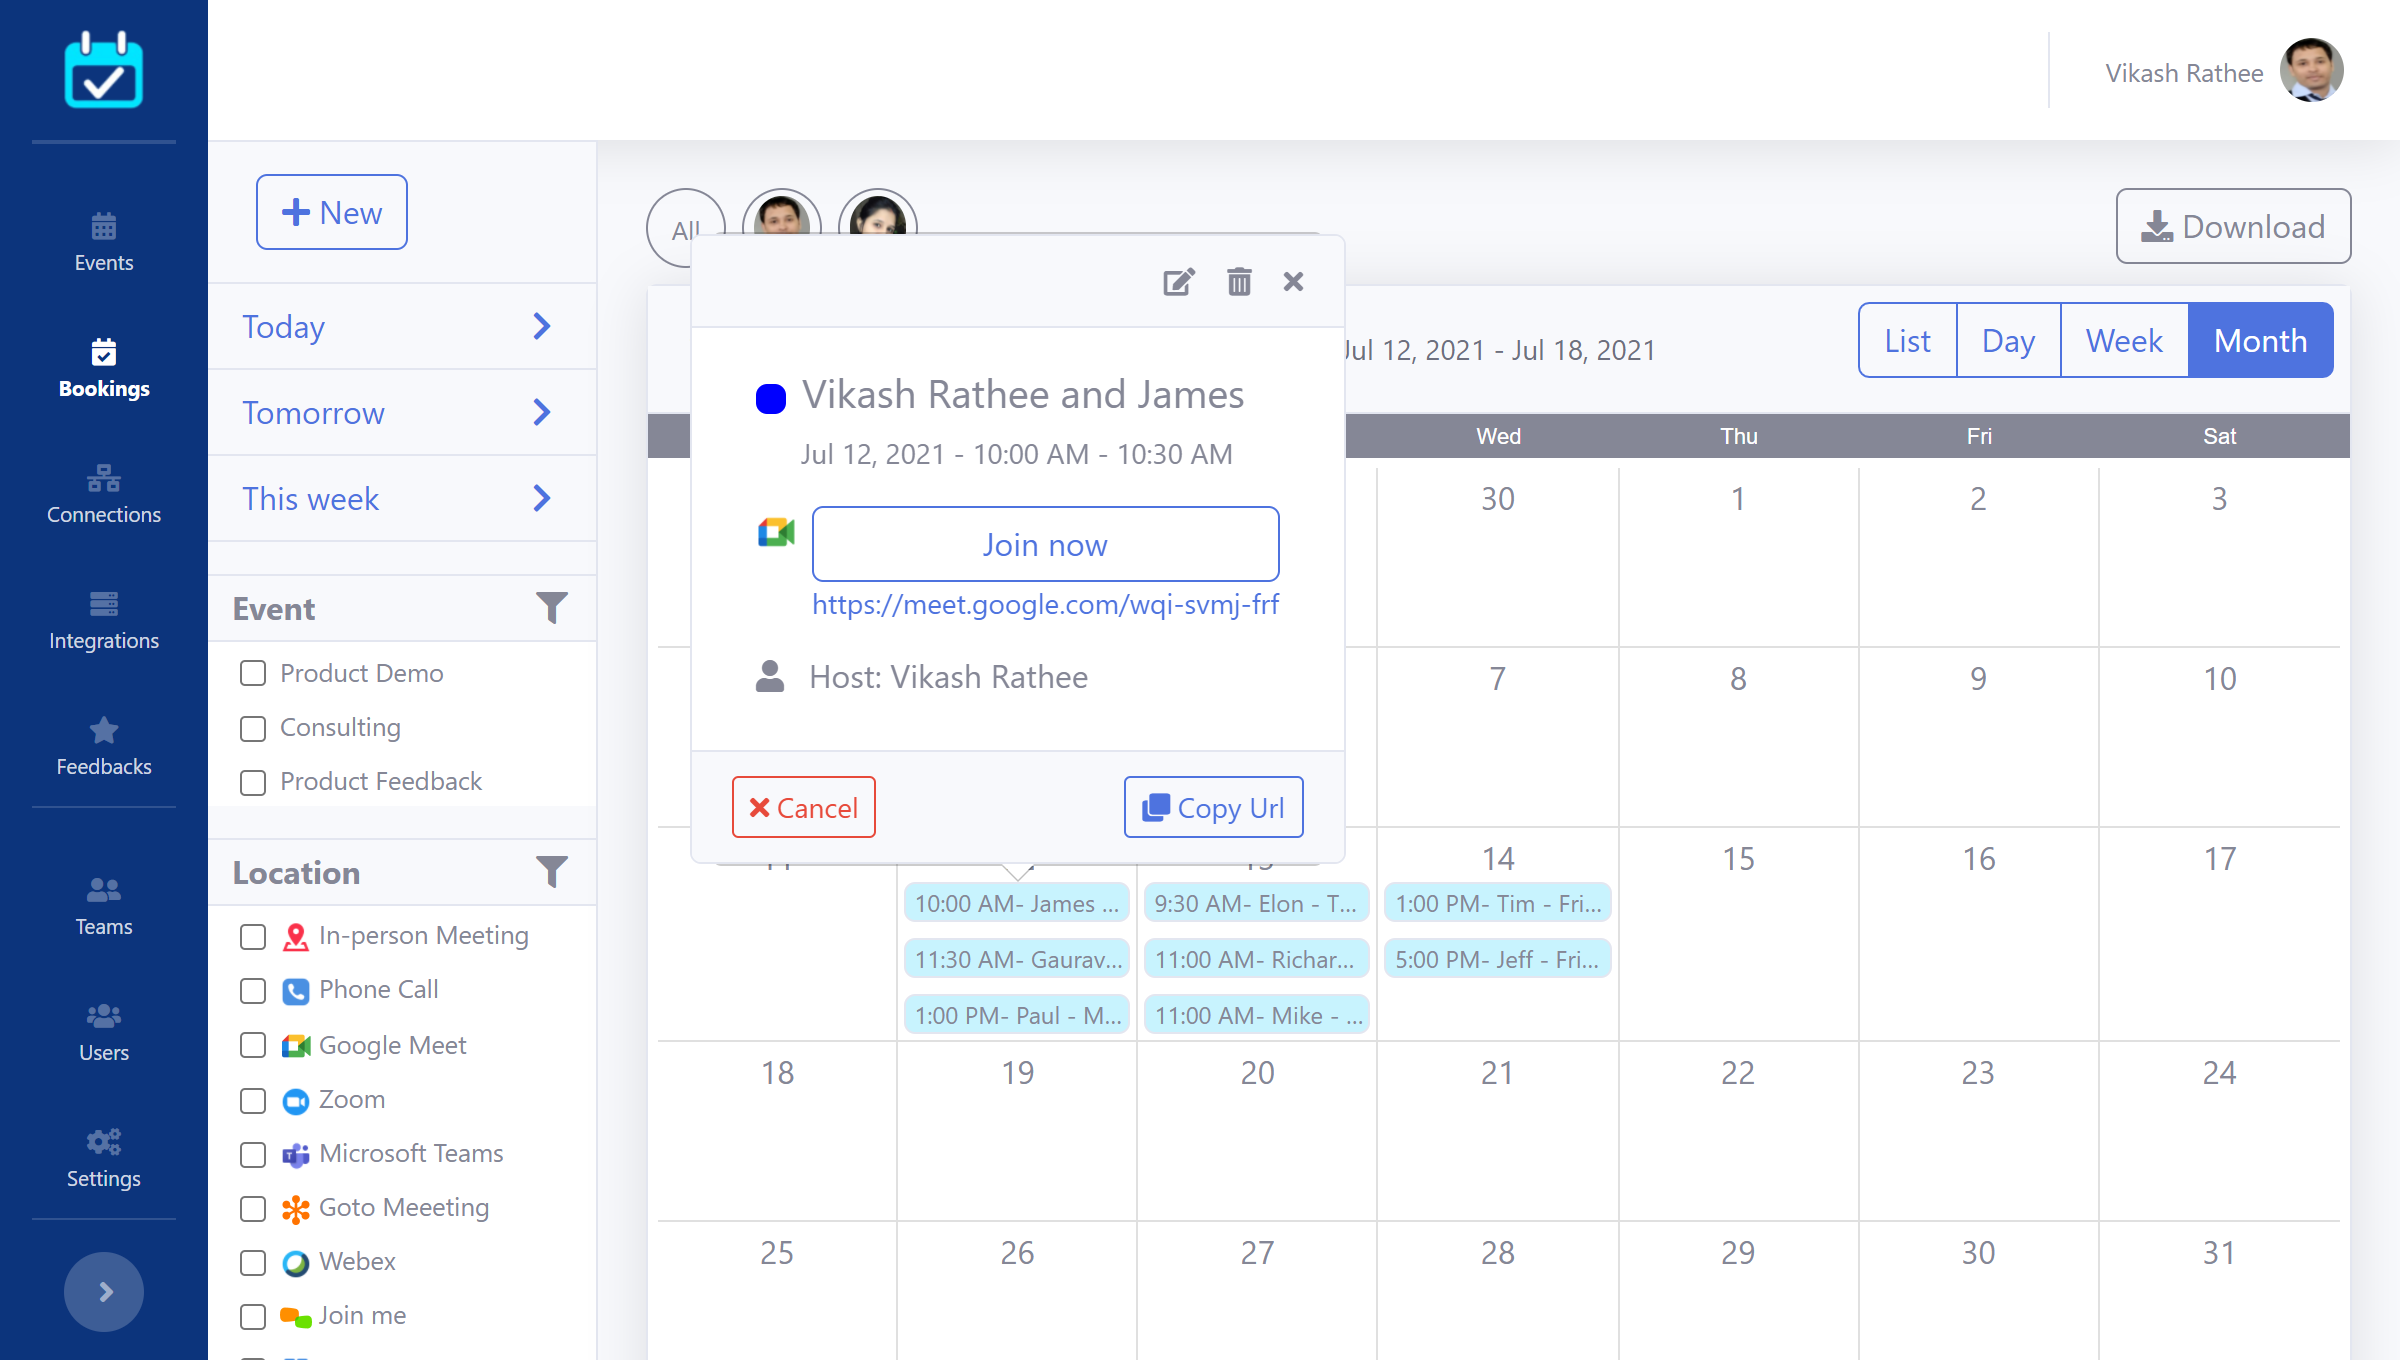 Calendar view of appointments